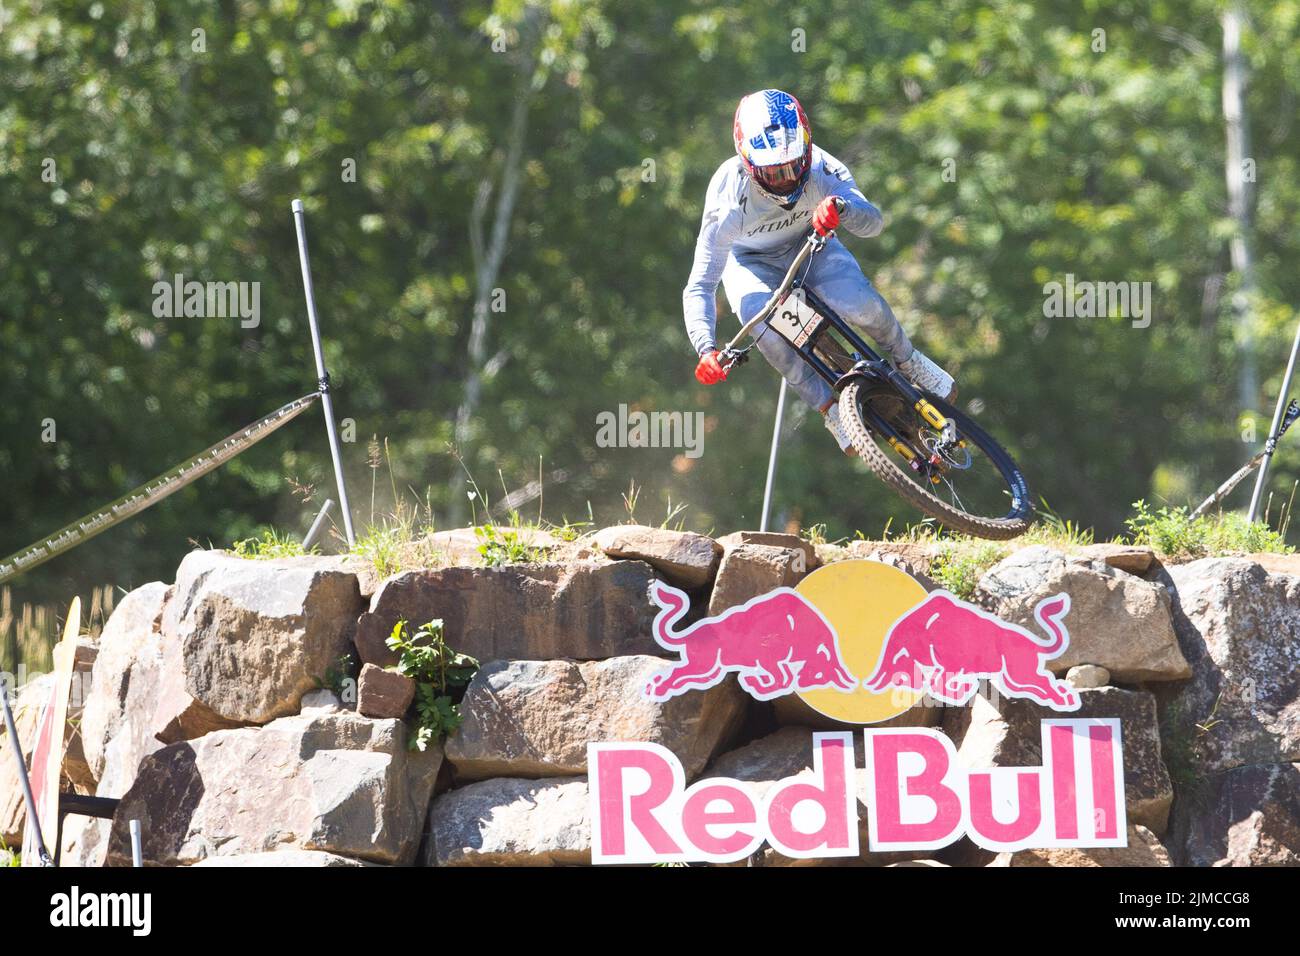 August 05, 2022: Iles Finn (3) of Canada places first in the MenÕs Downhill Qualifying Round of the 2022 Mercedes-Benz UCI Mountain Bike World Cup held at Mont-Sainte-Anne in Beaupre, Quebec, Canada. Daniel Lea/CSM Stock Photo